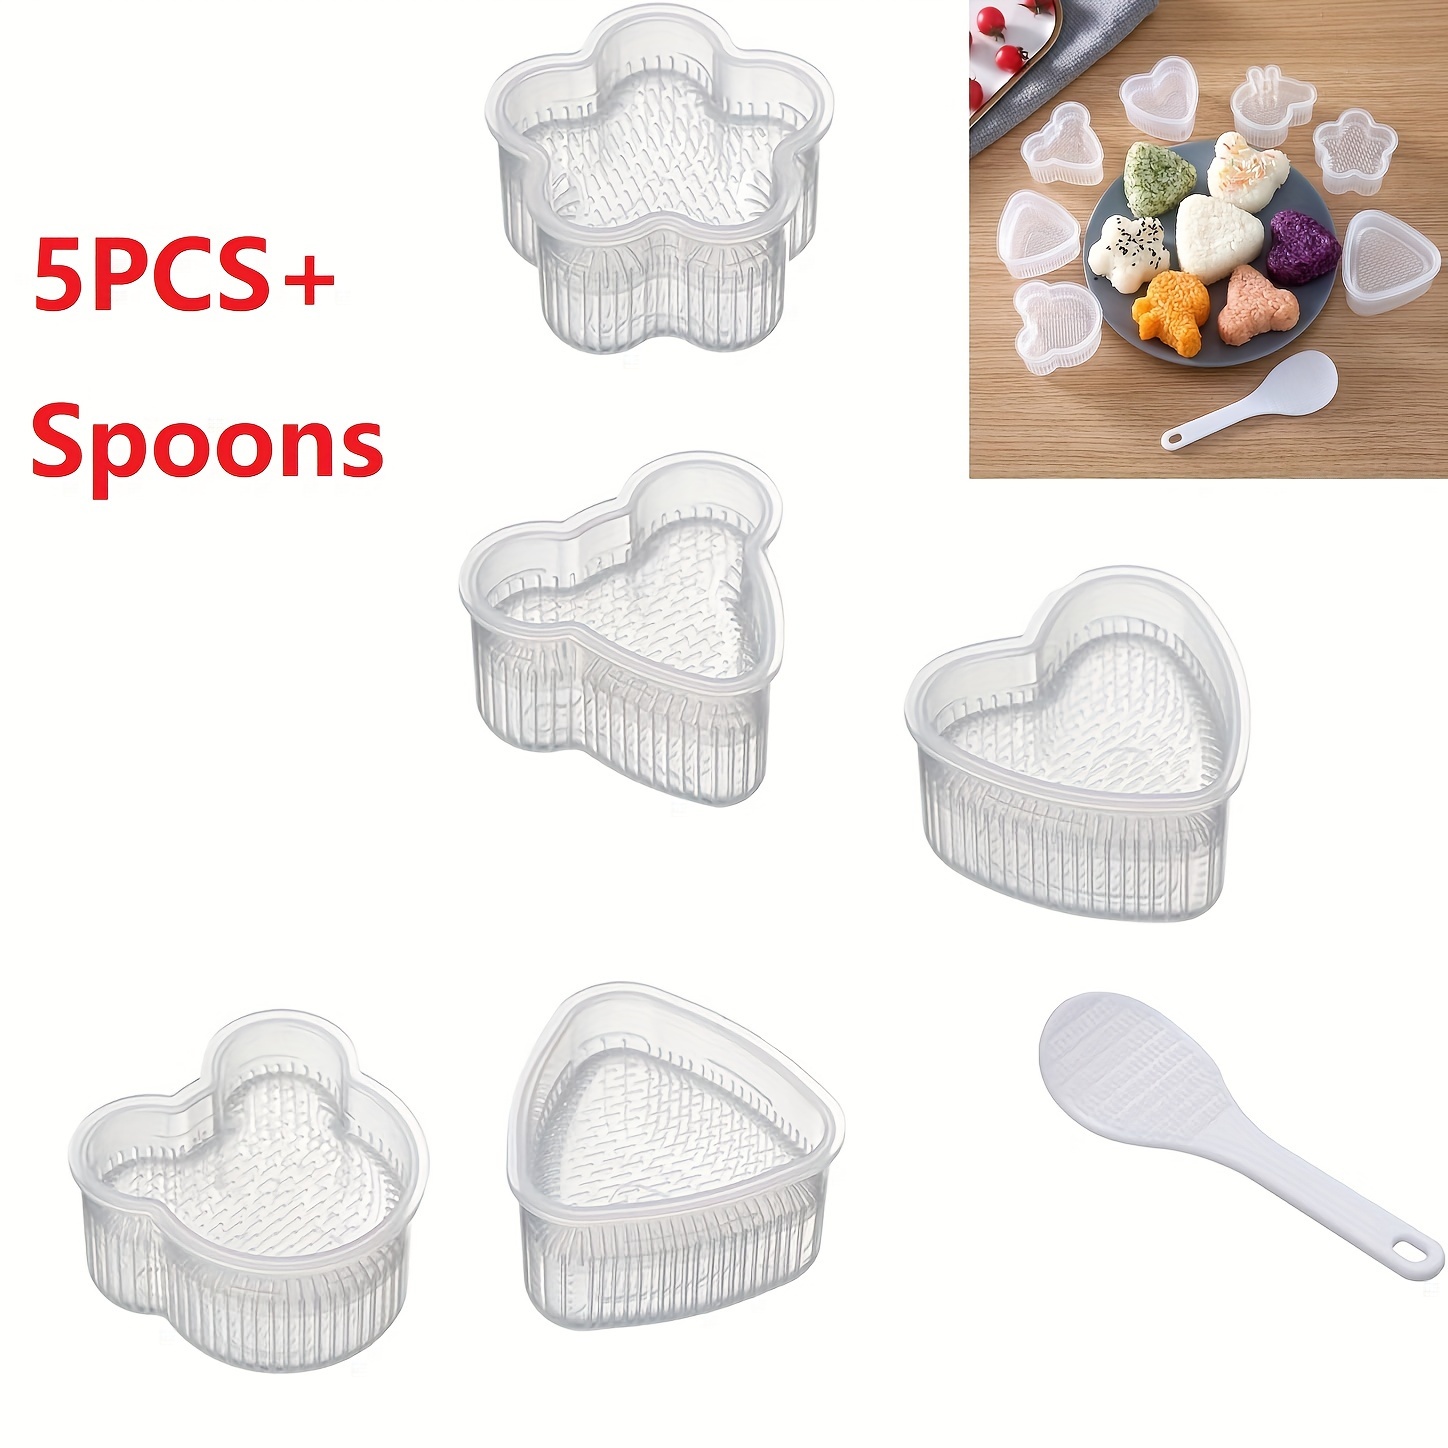 

5pcs Rice Ball Mold With Spoon, Rice Ball Makers With Spatula, Rice Ball Maker, Shake Onigiri Mold, Triangle Rice Ball Maker, Diy Supplies, Kitchen Gadgets, Bento Accessories